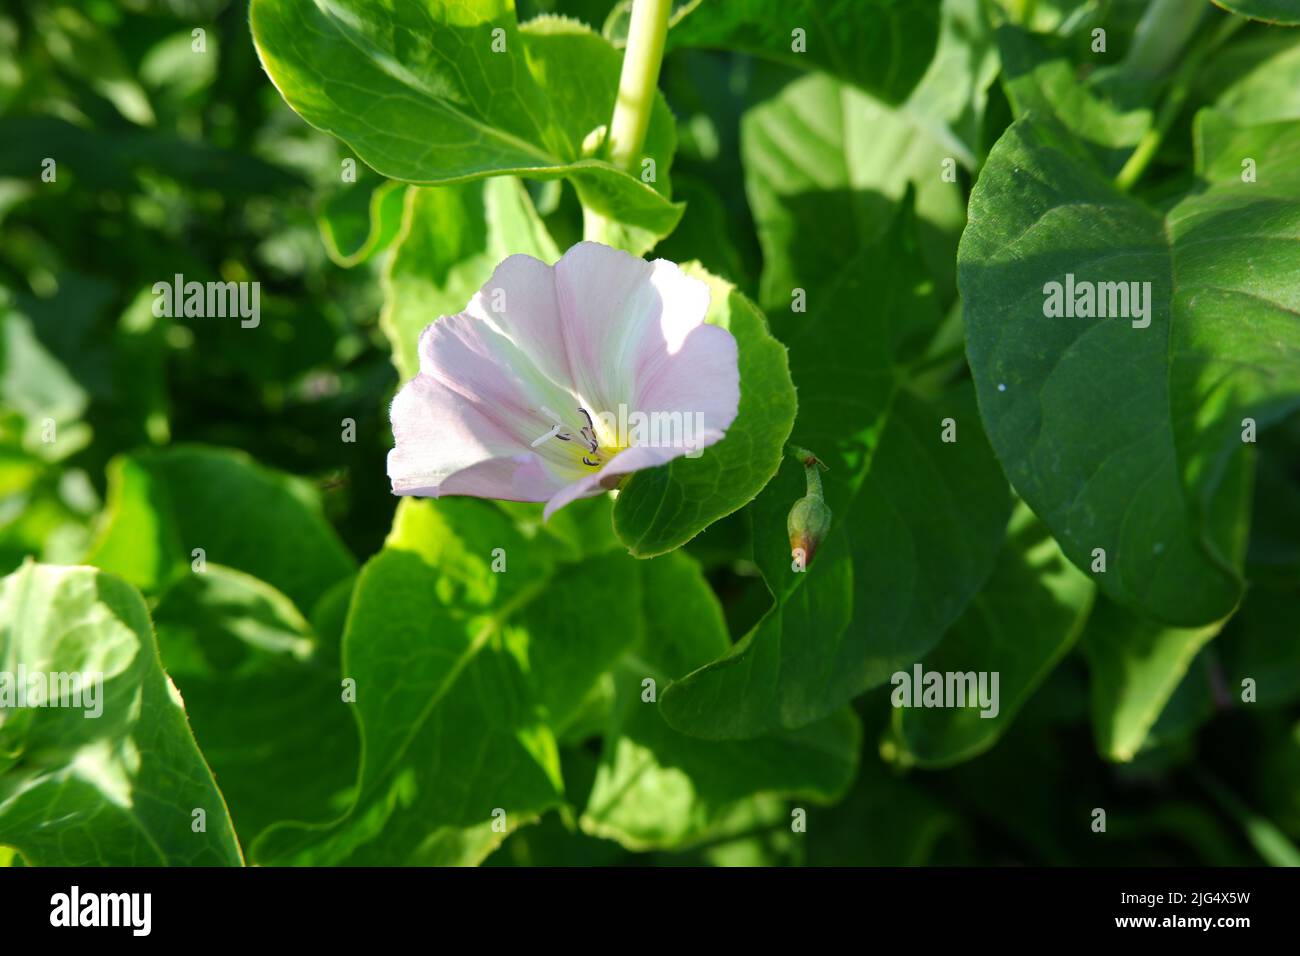 White-pink bindweed close-up in green foliage. A flower growing in a village garden. Stock Photo